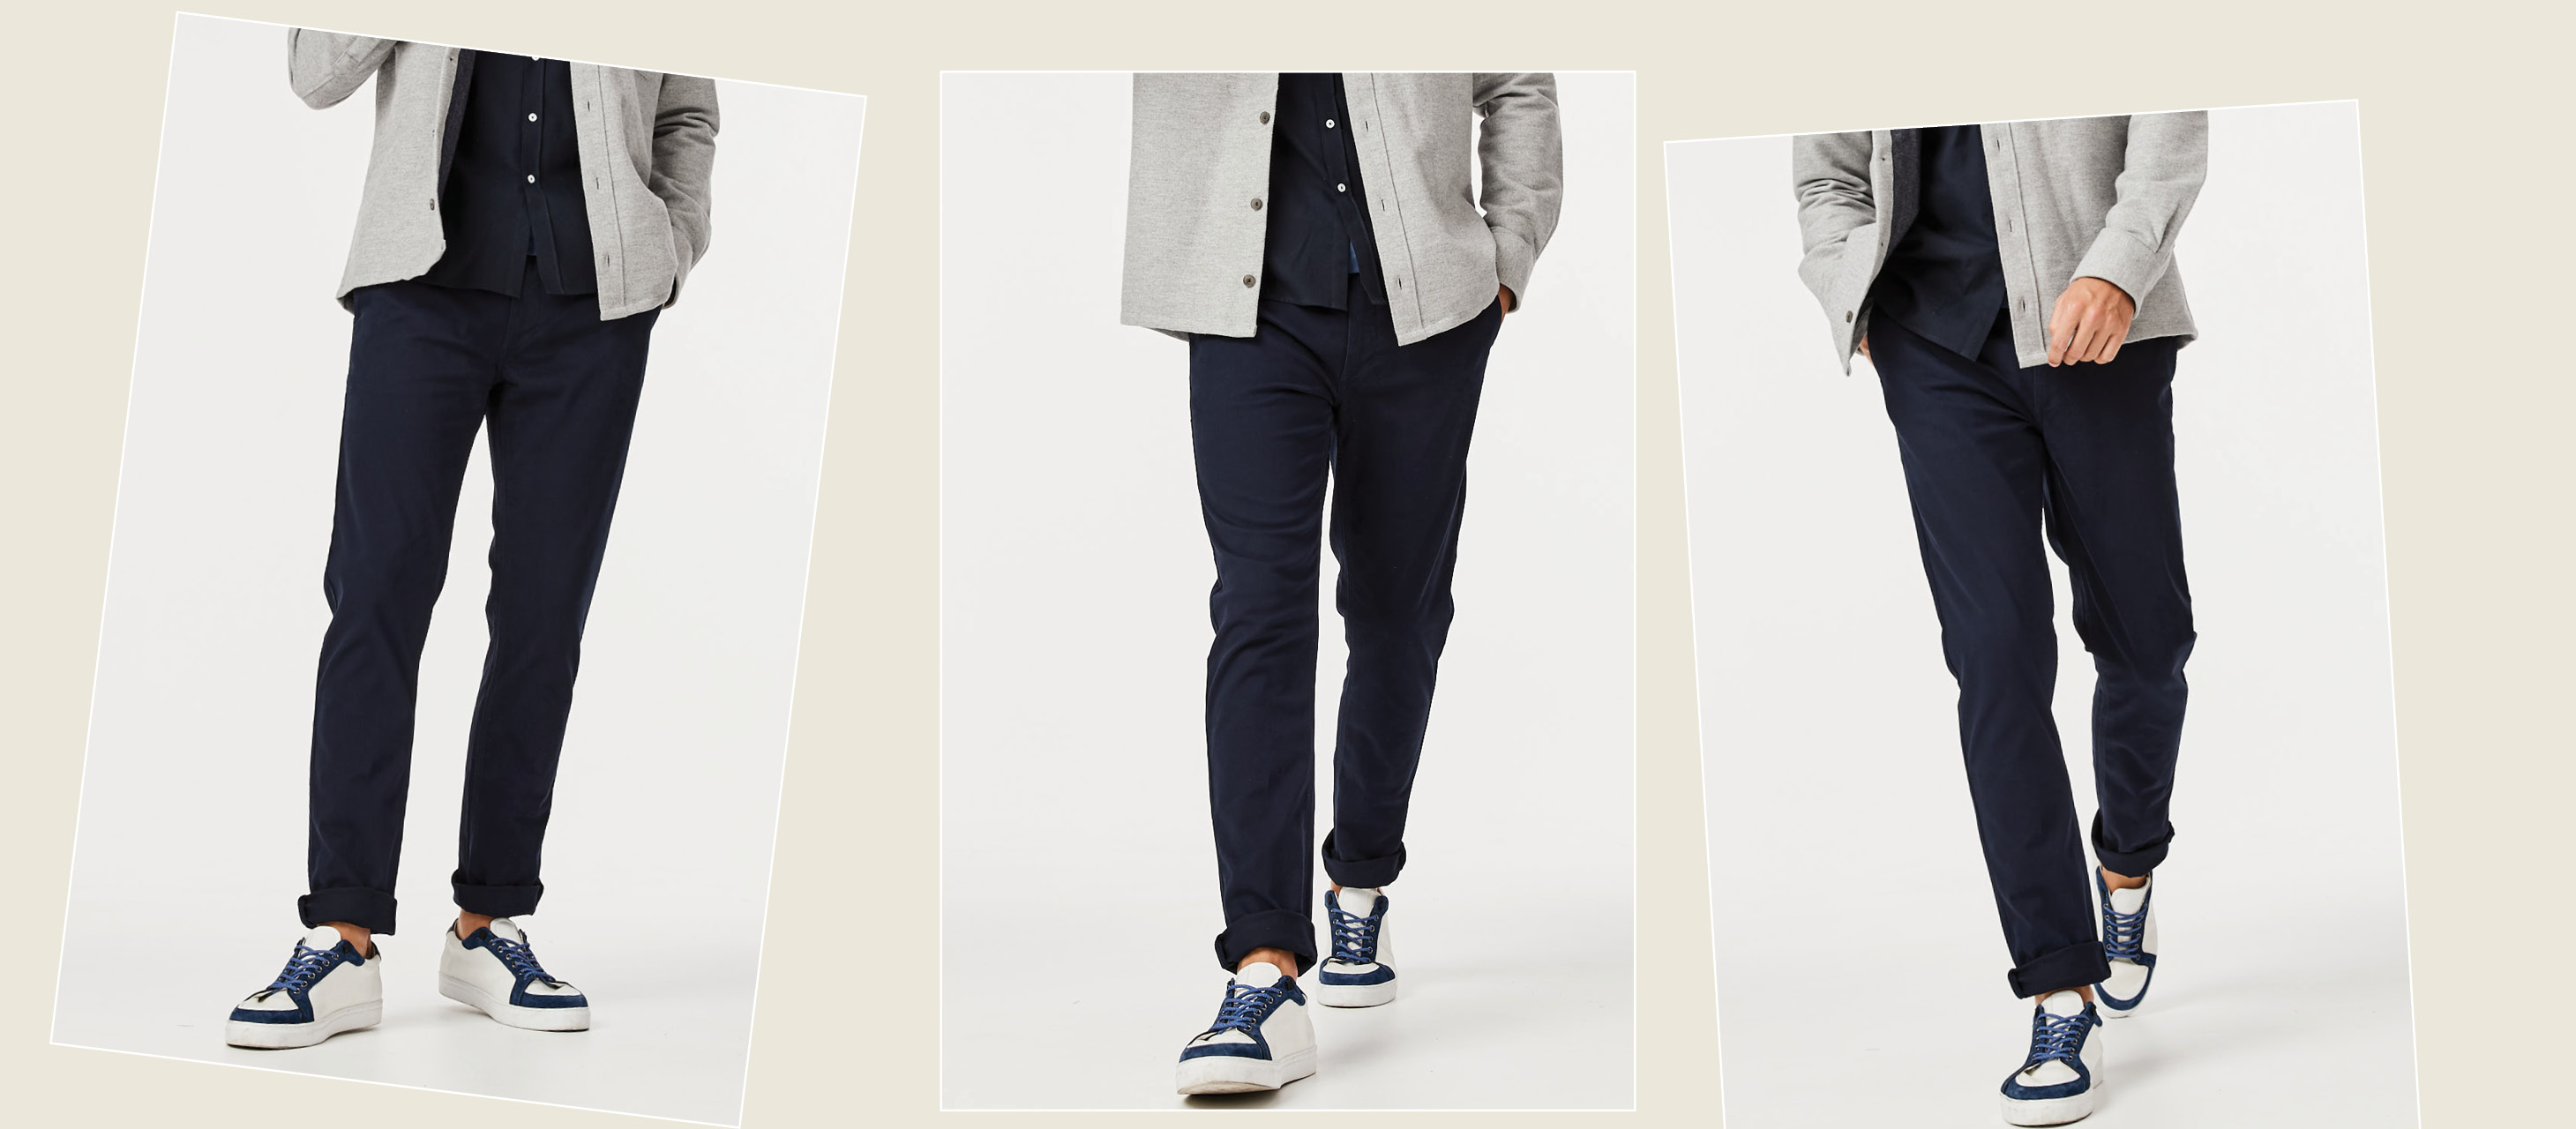 Men's Chinos For Winter